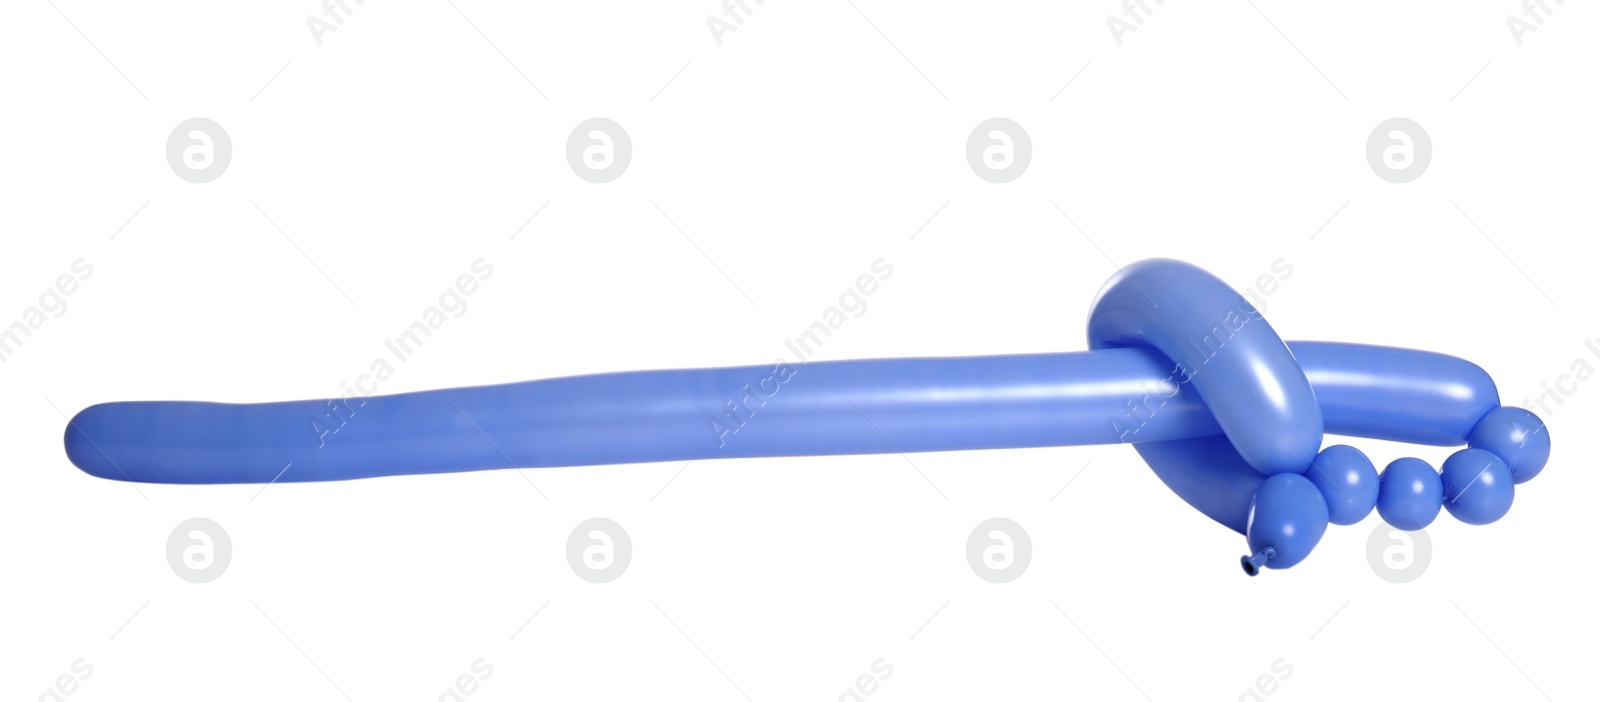 Photo of Sword figure made of modelling balloon on white background